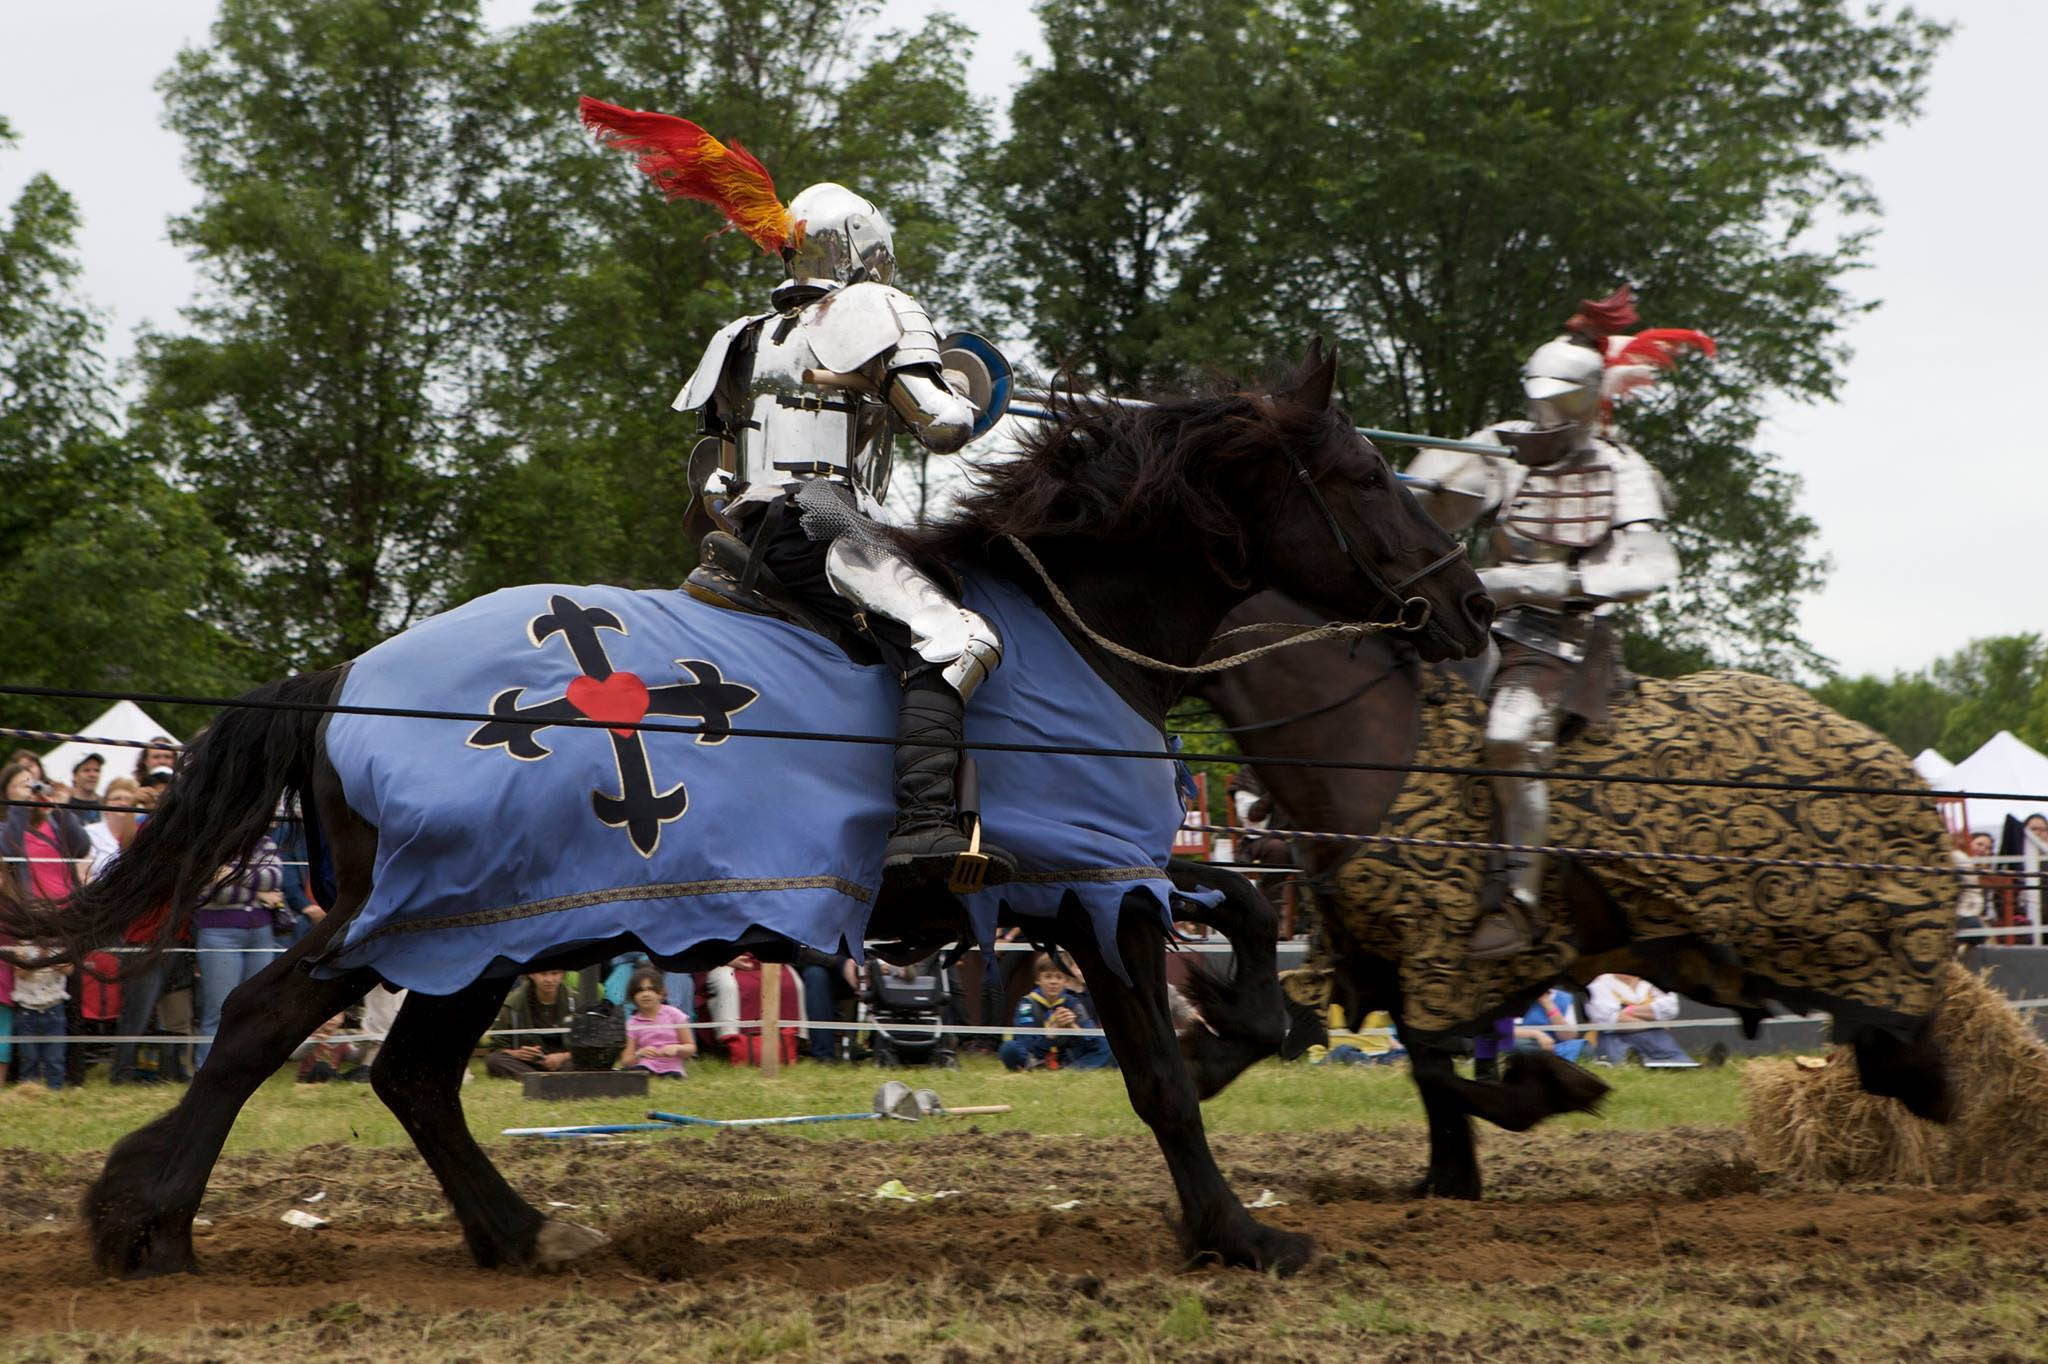 Return to the Middle Ages this weekend at Medieval Festival Cornwall